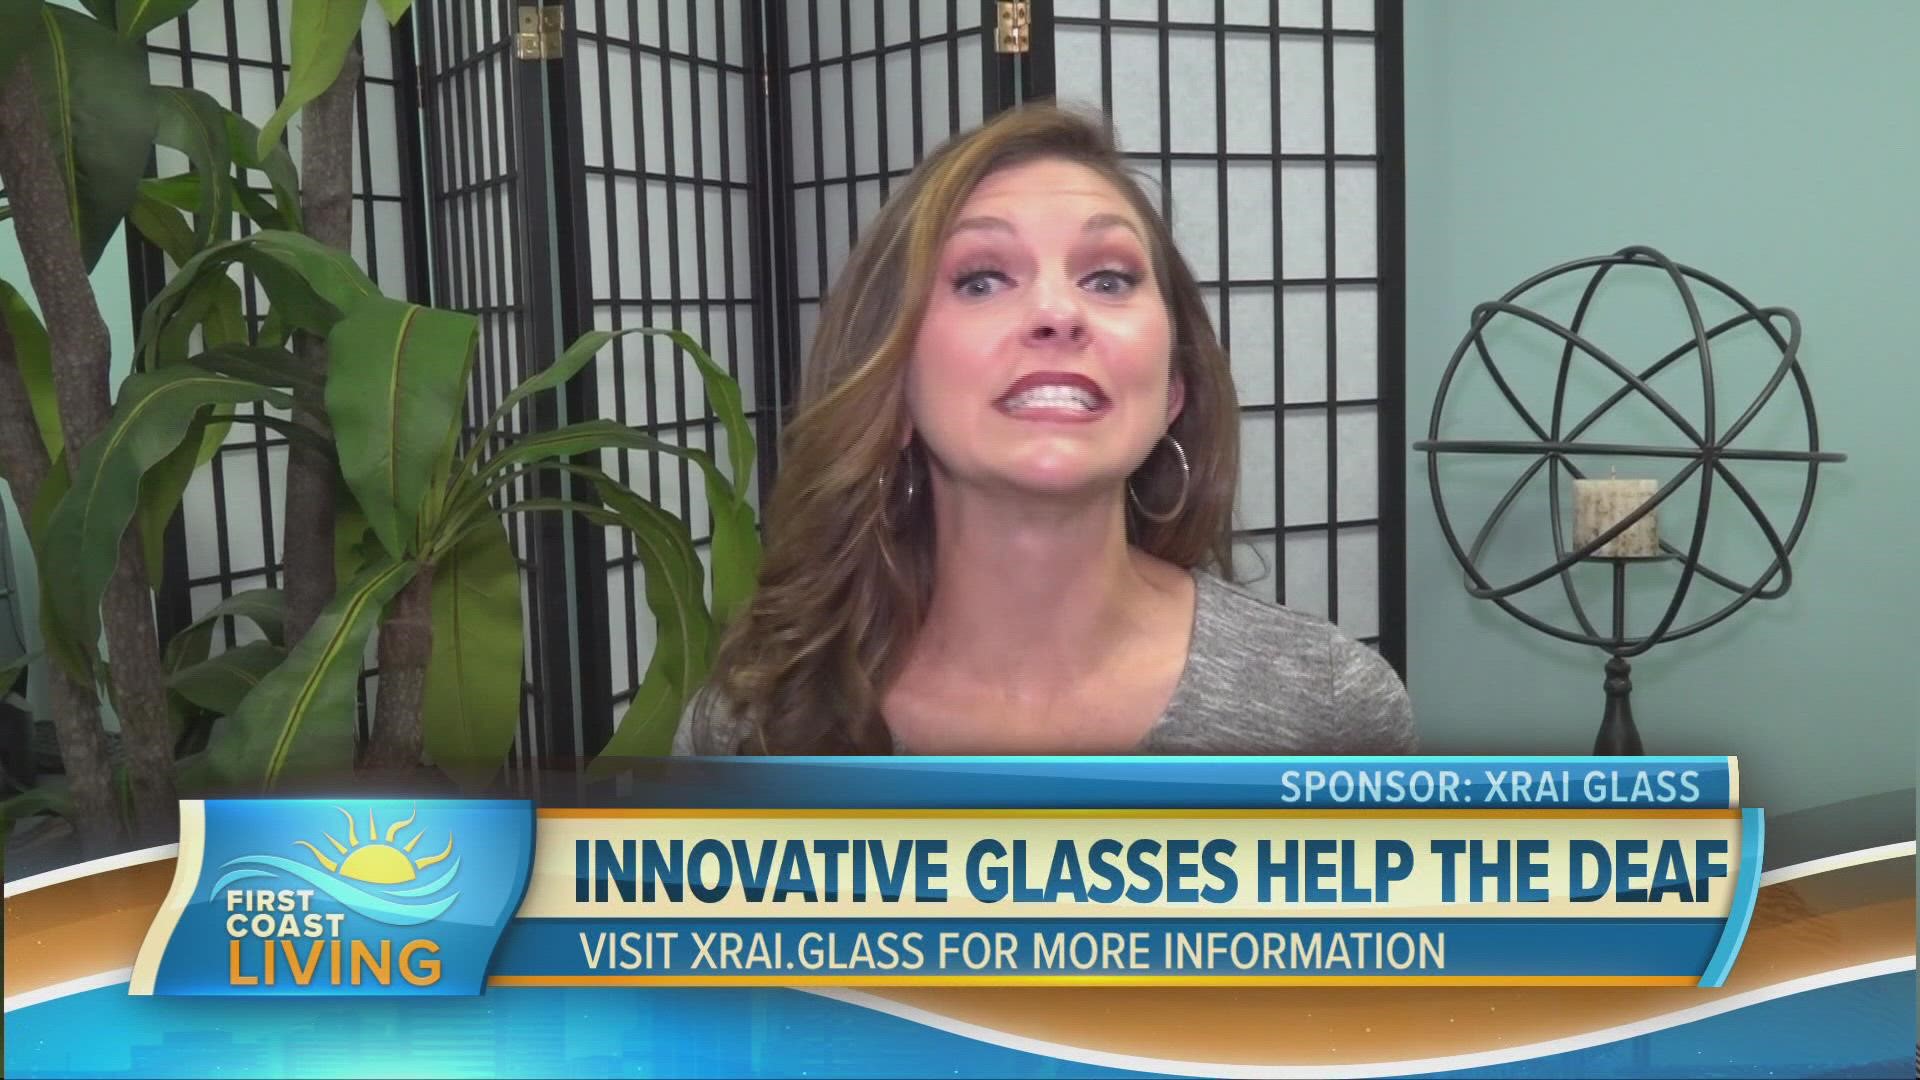 This technology, called XRAI Glass, uses a smart phone app with AI driven software aims to aid those that have hearing difficulties so they don't miss conversations.